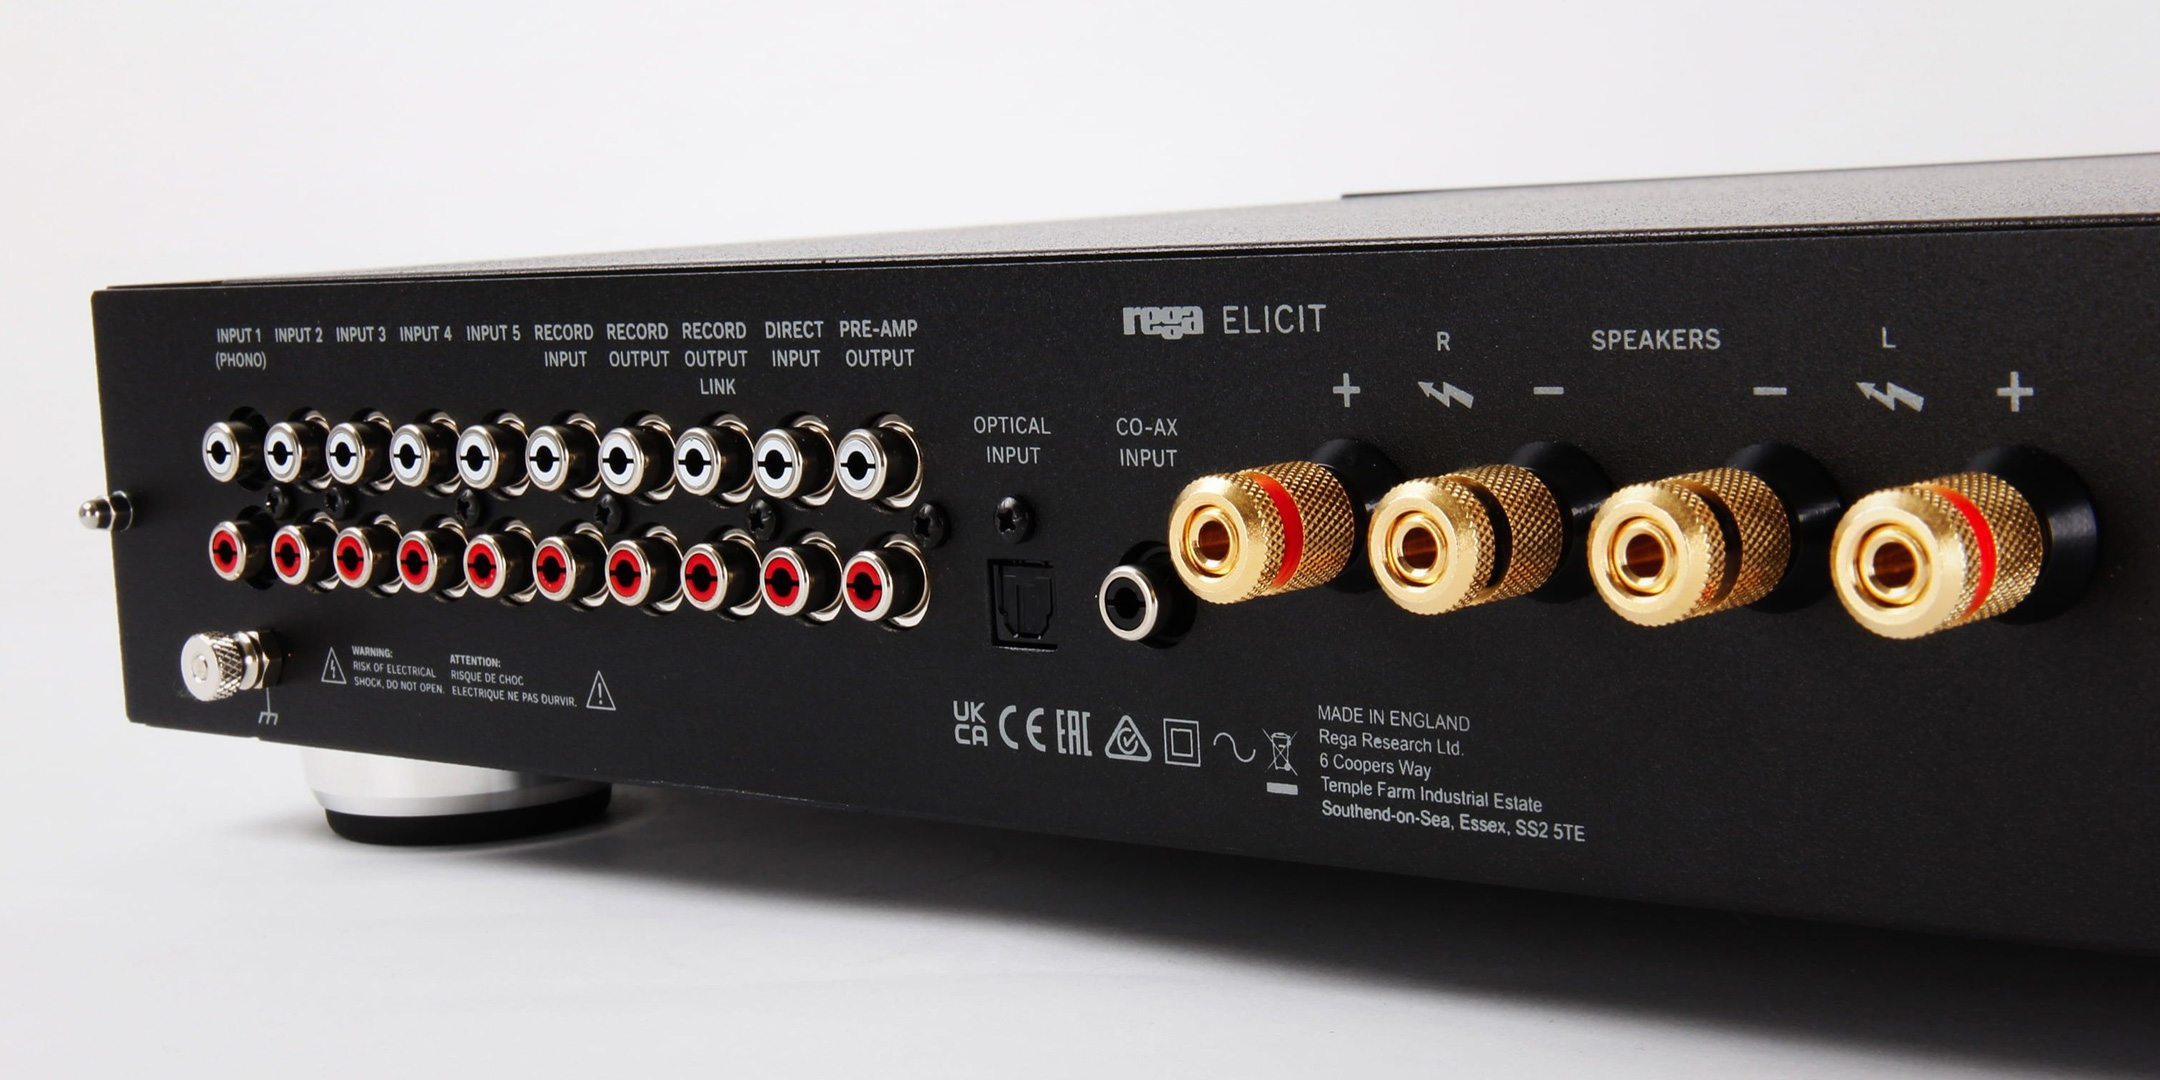 Pic of Rega Elicit mk5 amp from the back showing the connectors